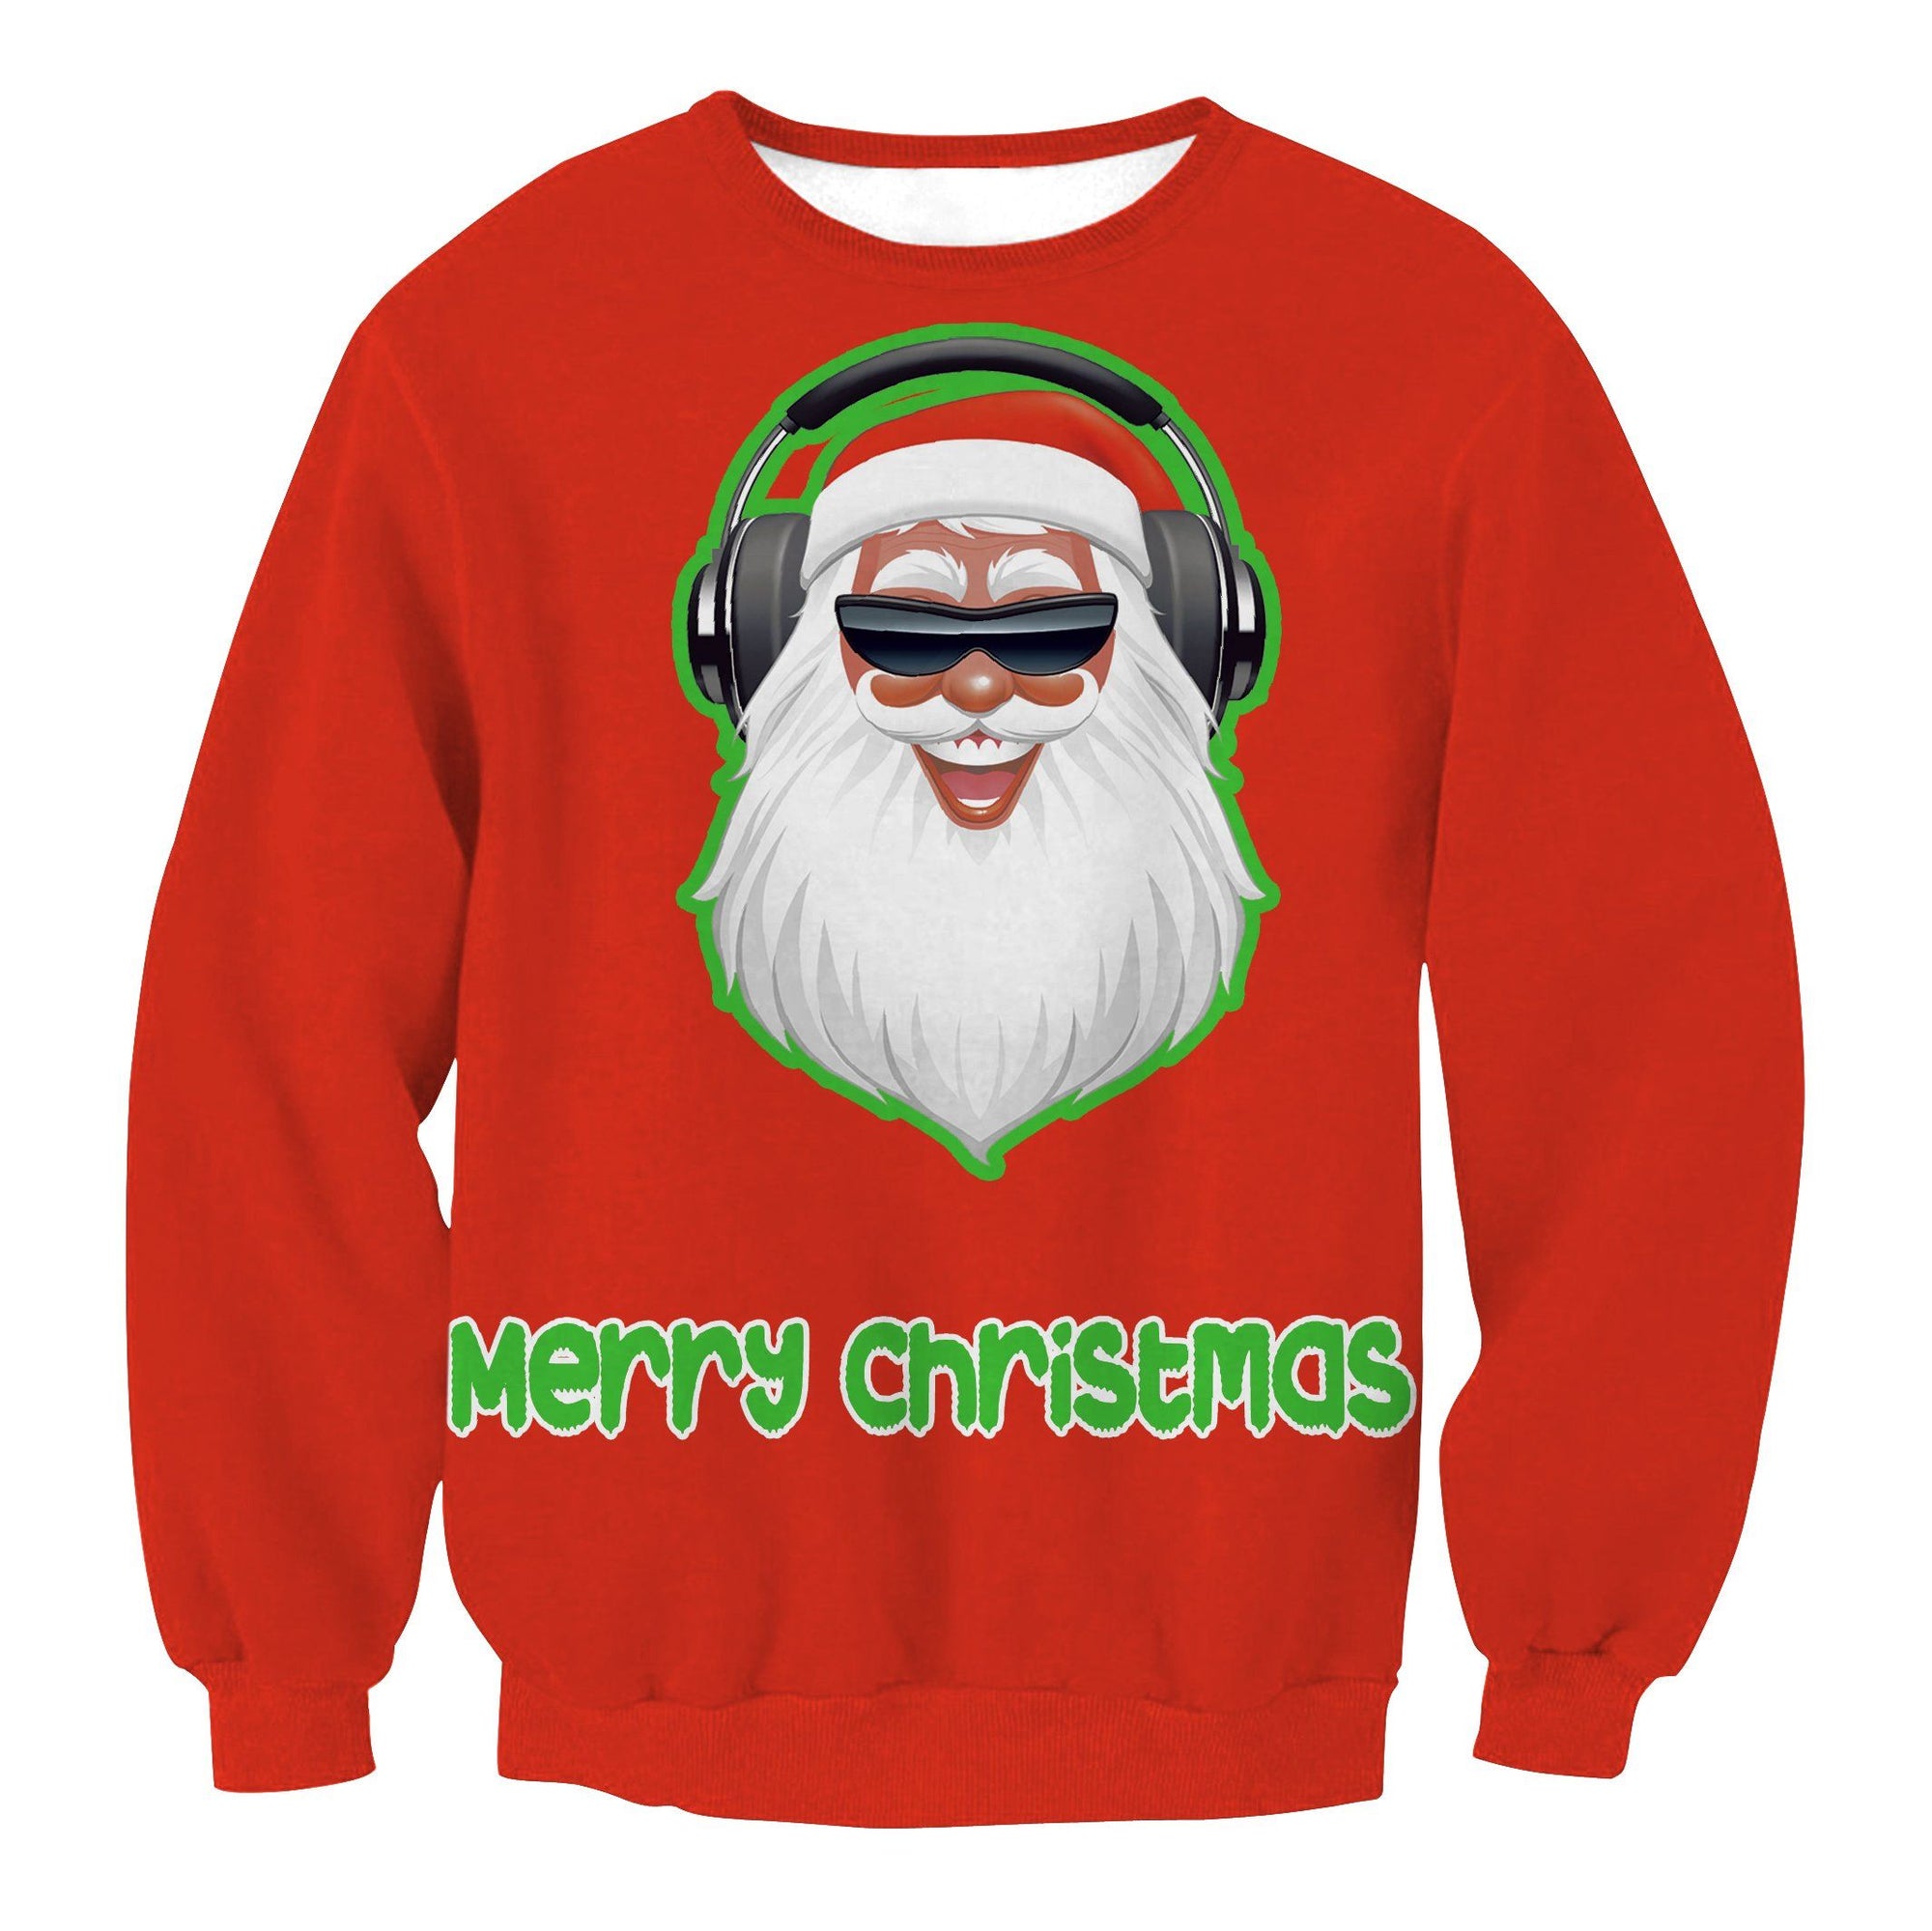 dj-santa-claus-icon-super-cool-red-ugly-christmas-sweater